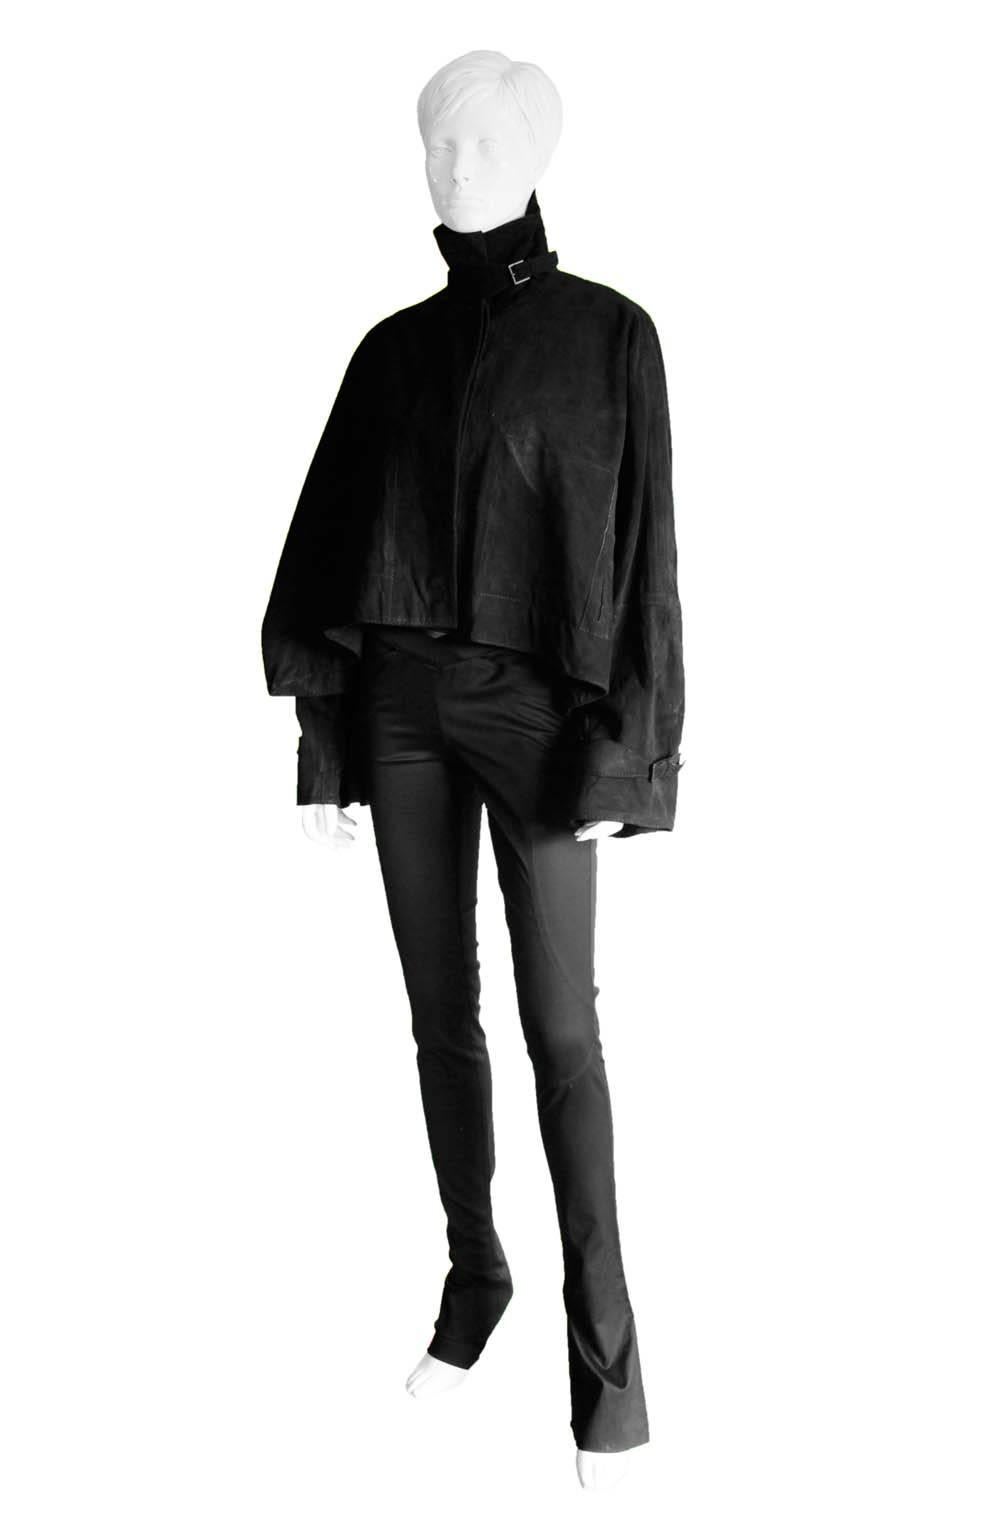 That Incredibly Rare Tom Ford For Gucci Fall Winter 2002 Gothic Runway Collection Black Suede Leather "Batwing" Jacket!

This heavenly jacket is an Italian size 40 & fits a US size 4 to 6 & even a size 8 beautifully. This jacket is